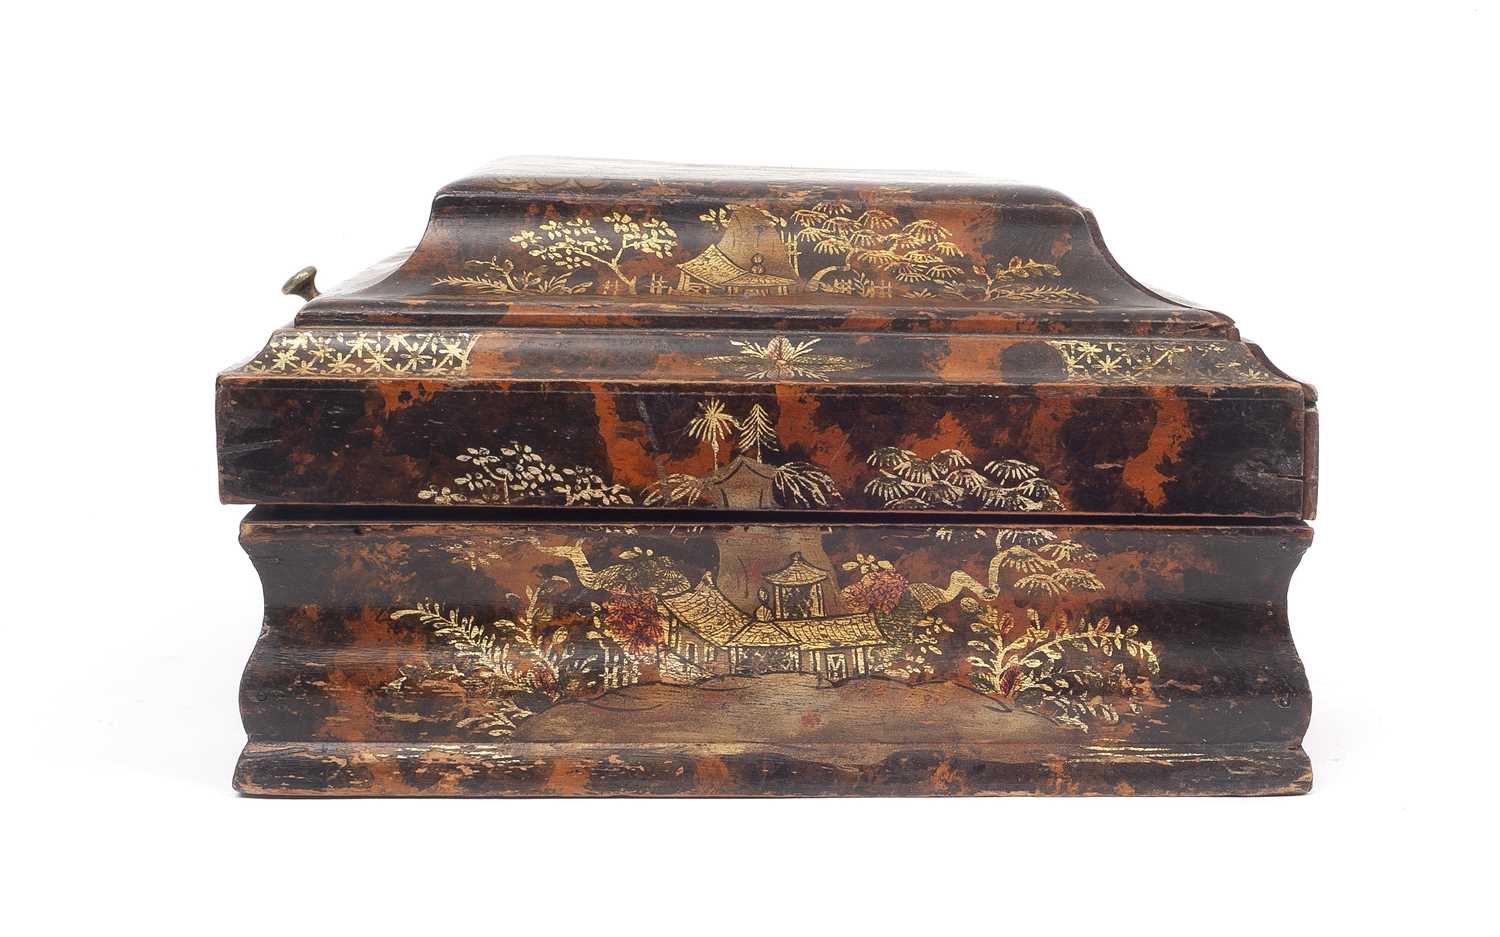 A FINE 18TH CENTURY CHINOISERIE DECORATED AND FAUX TORTOISESHELL PAINTED BOX - Image 3 of 4